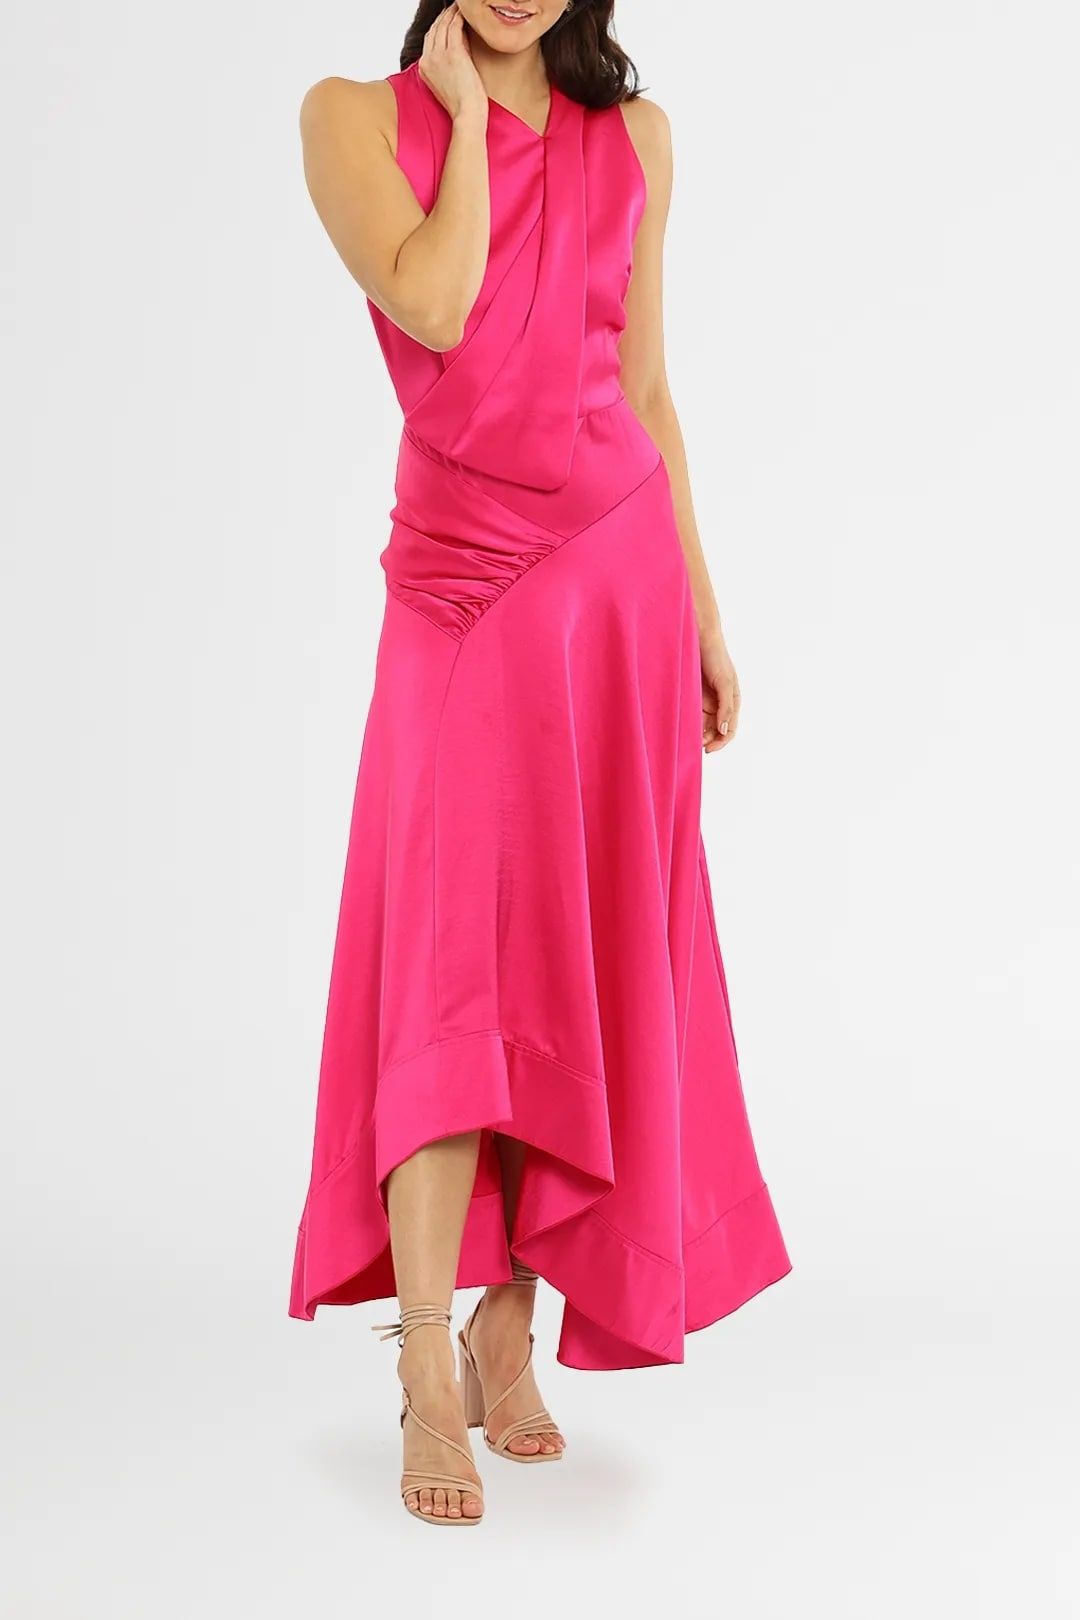 Hire Palmera dress in pink for summer events.